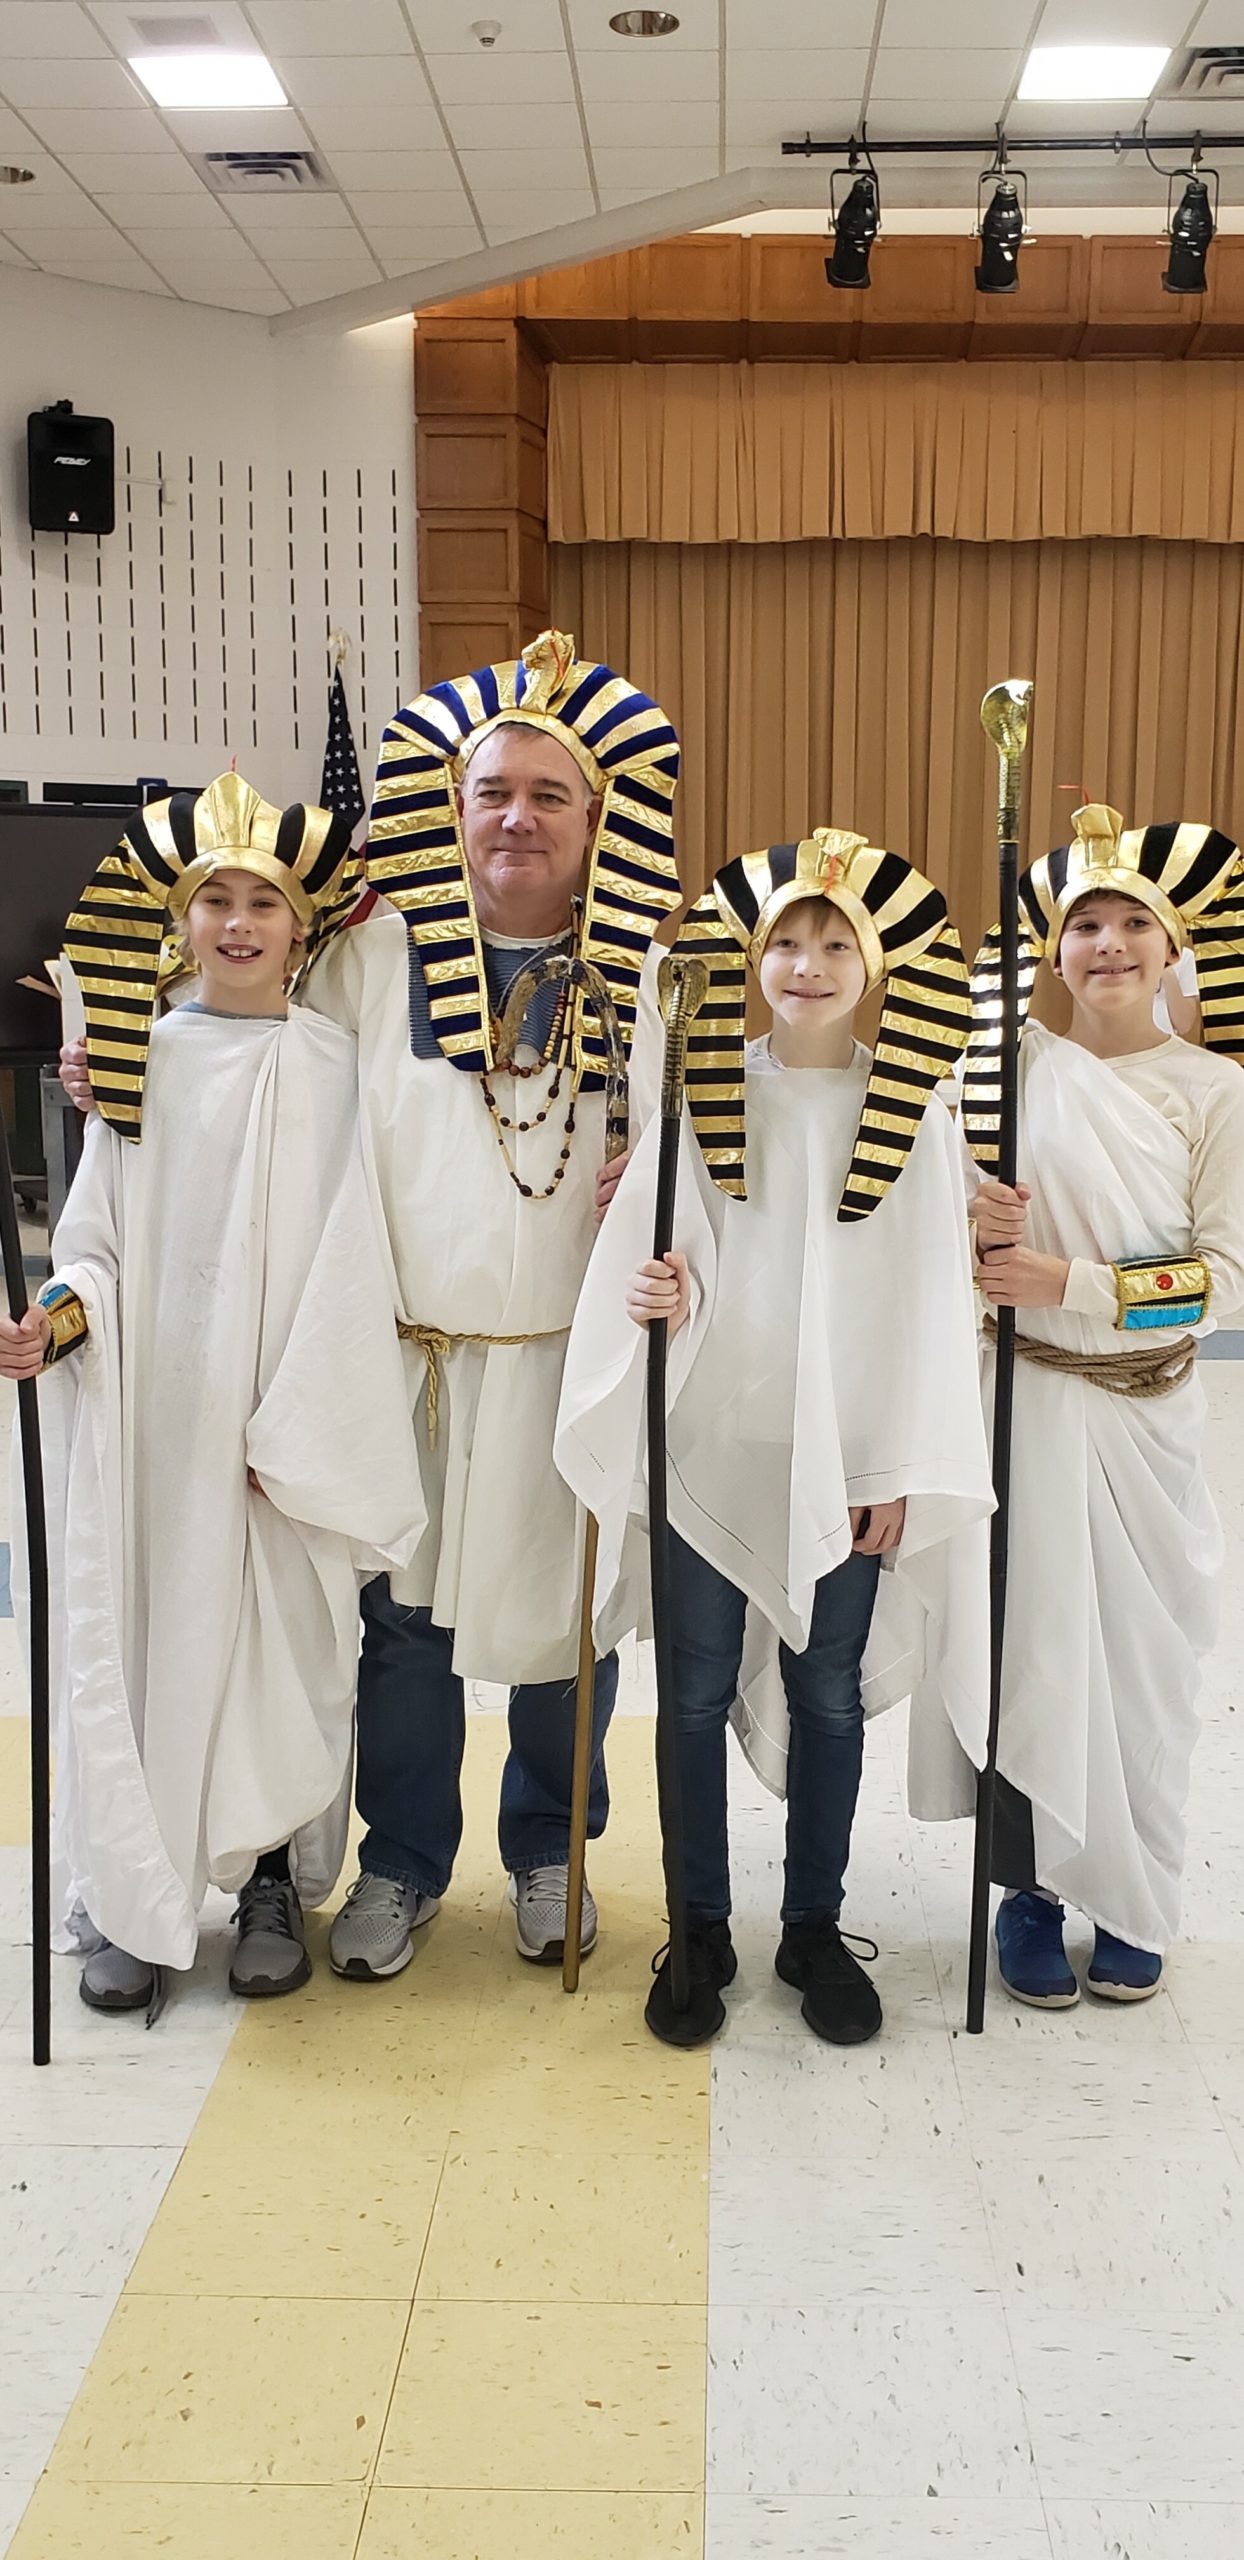 East Quogue Elementary School's sixth grade held its annual Egyptian market recently and, from left, Cooper Daniels, George Purkis, Matthew Dunkirk and Aidan Judd were dressed for the occasion.